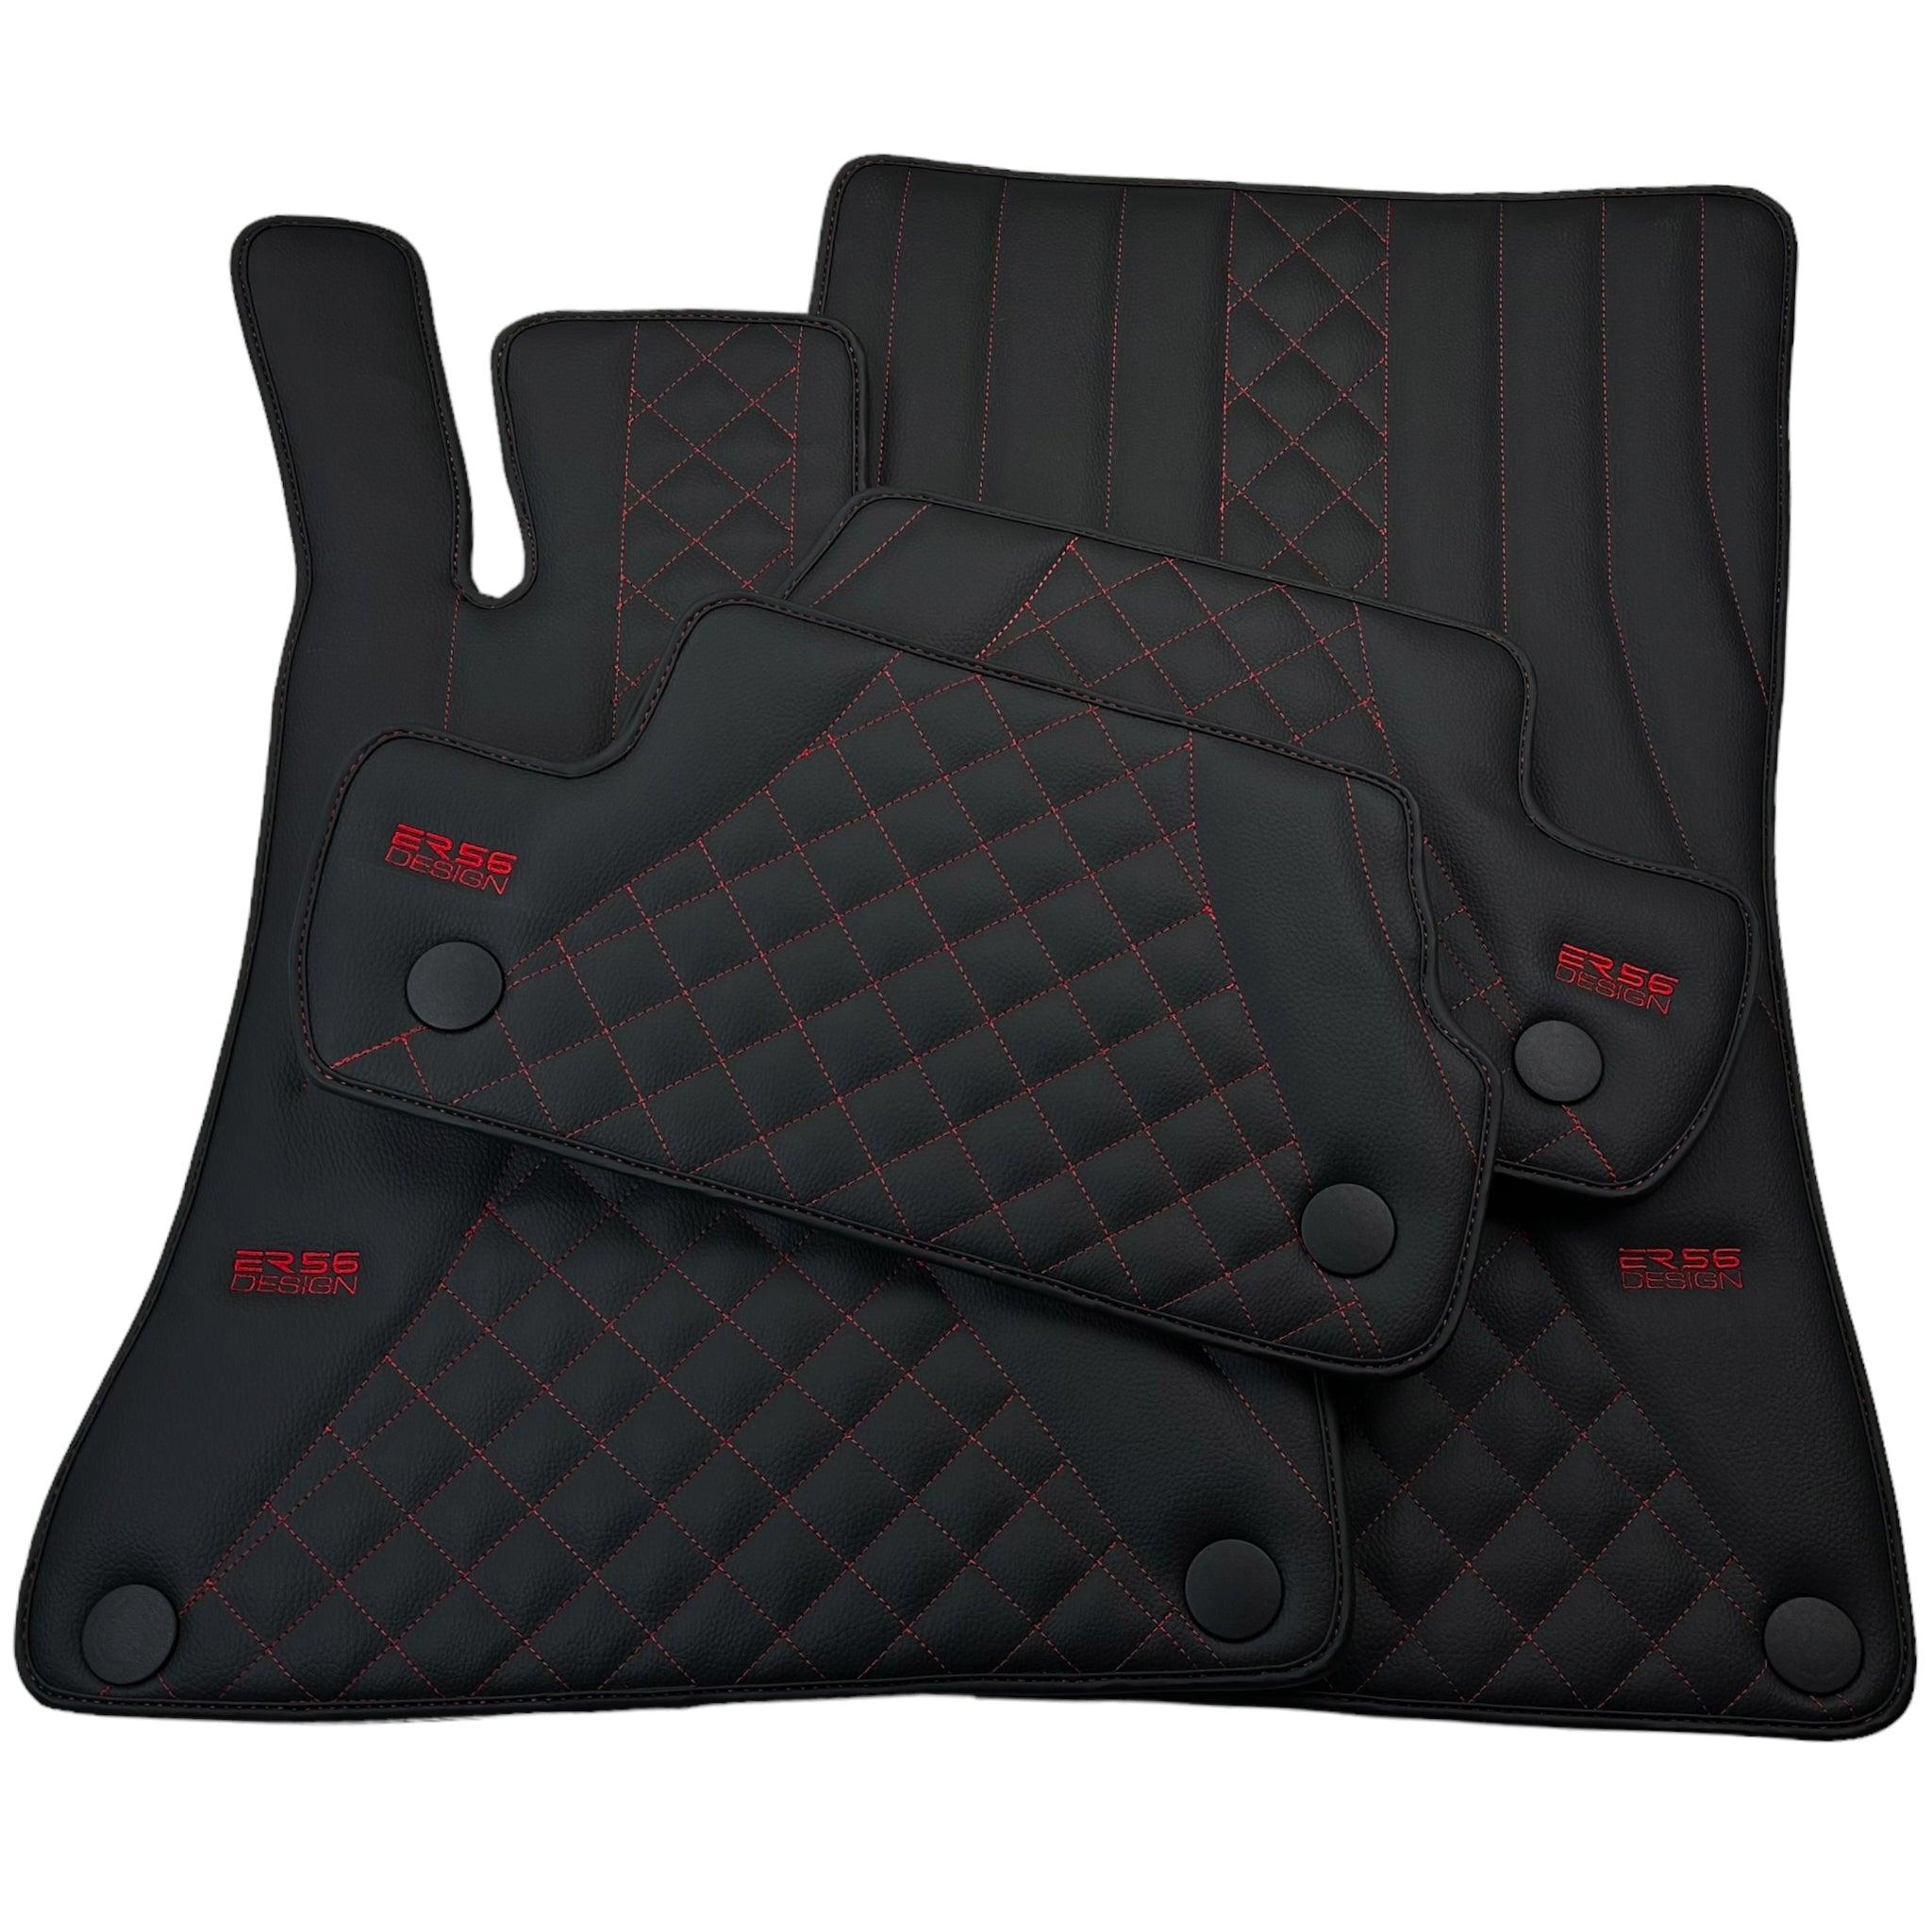 Black Leather Floor Mats For Mercedes Benz S-Class C126 Coupe (1981-1991)